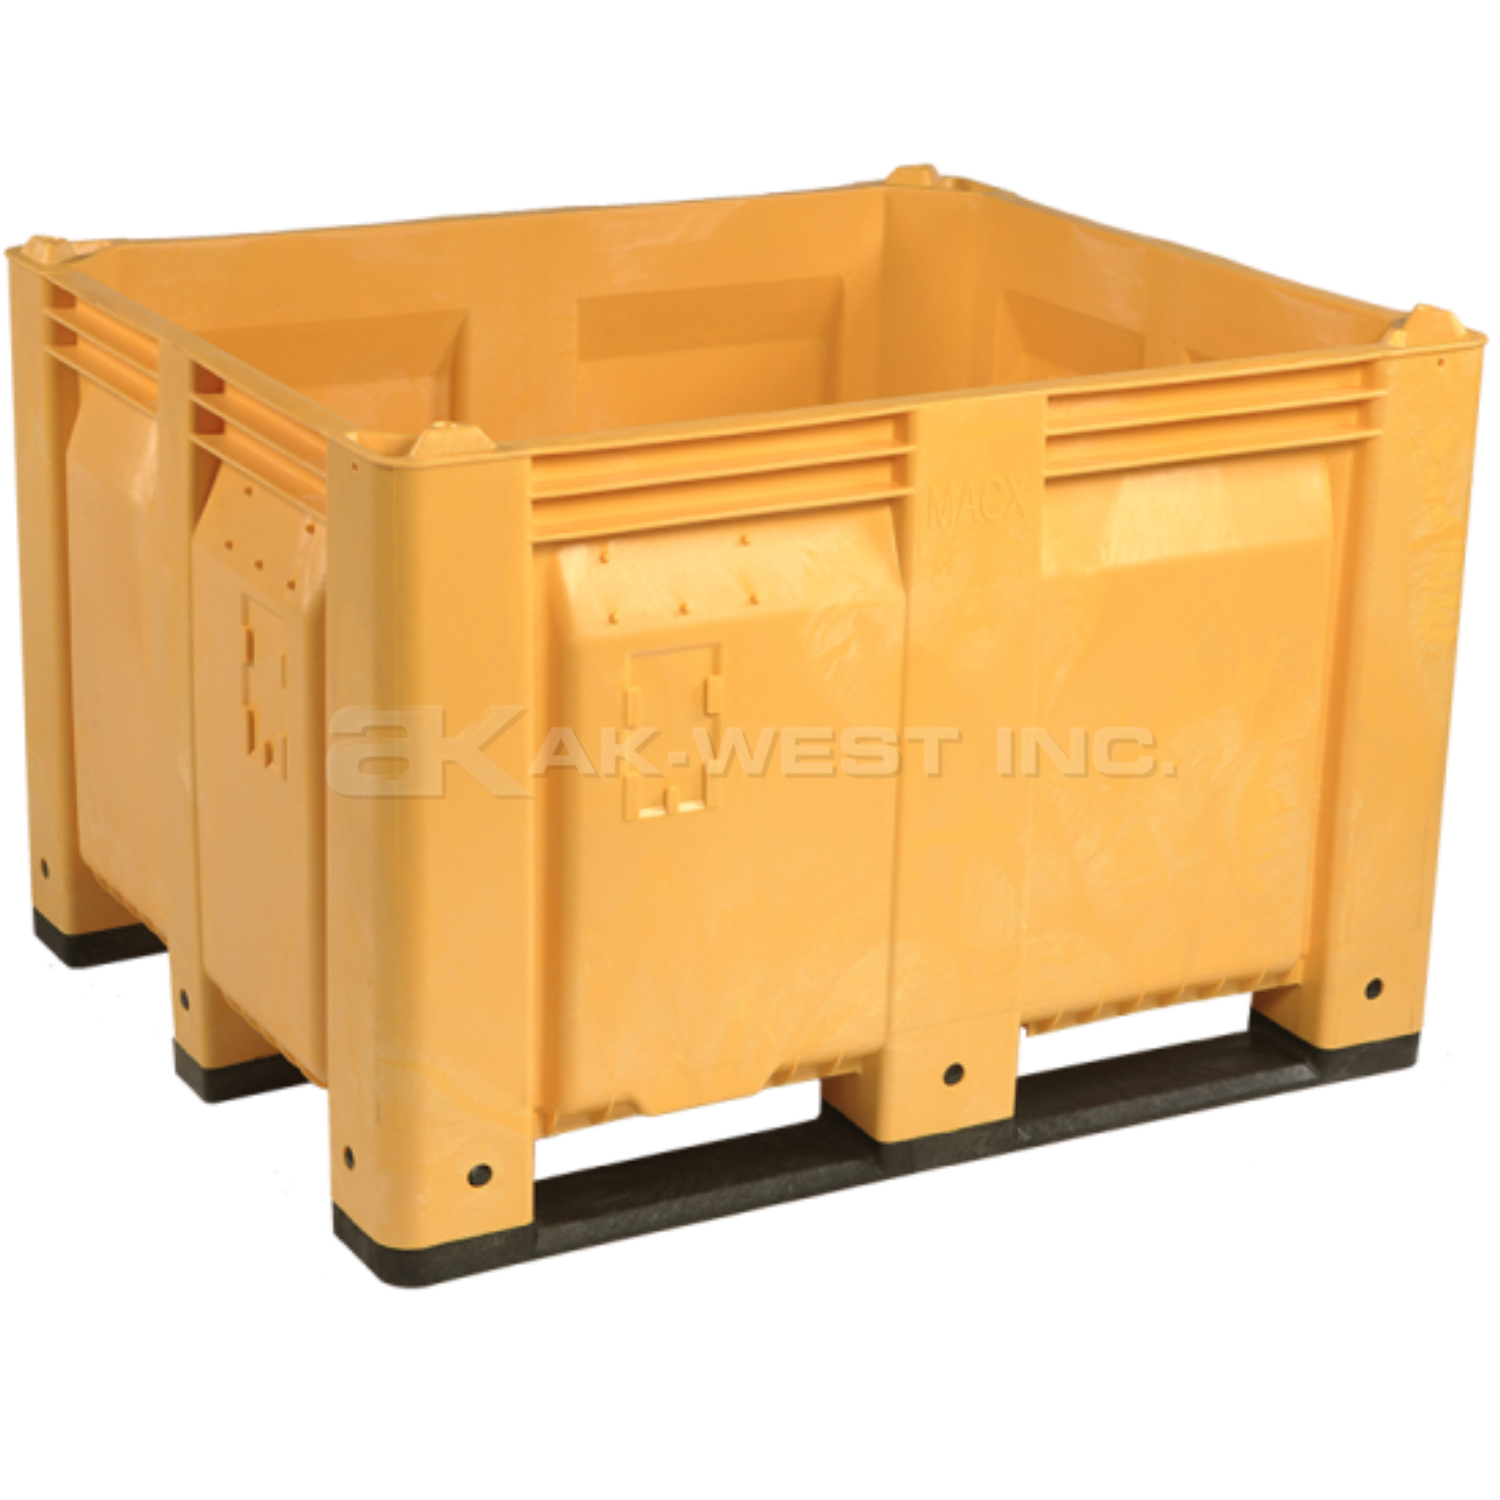 Yellow, 48"L x 40"W x 31"H Bulk Container w/ Solid Sides, Long Side Runners